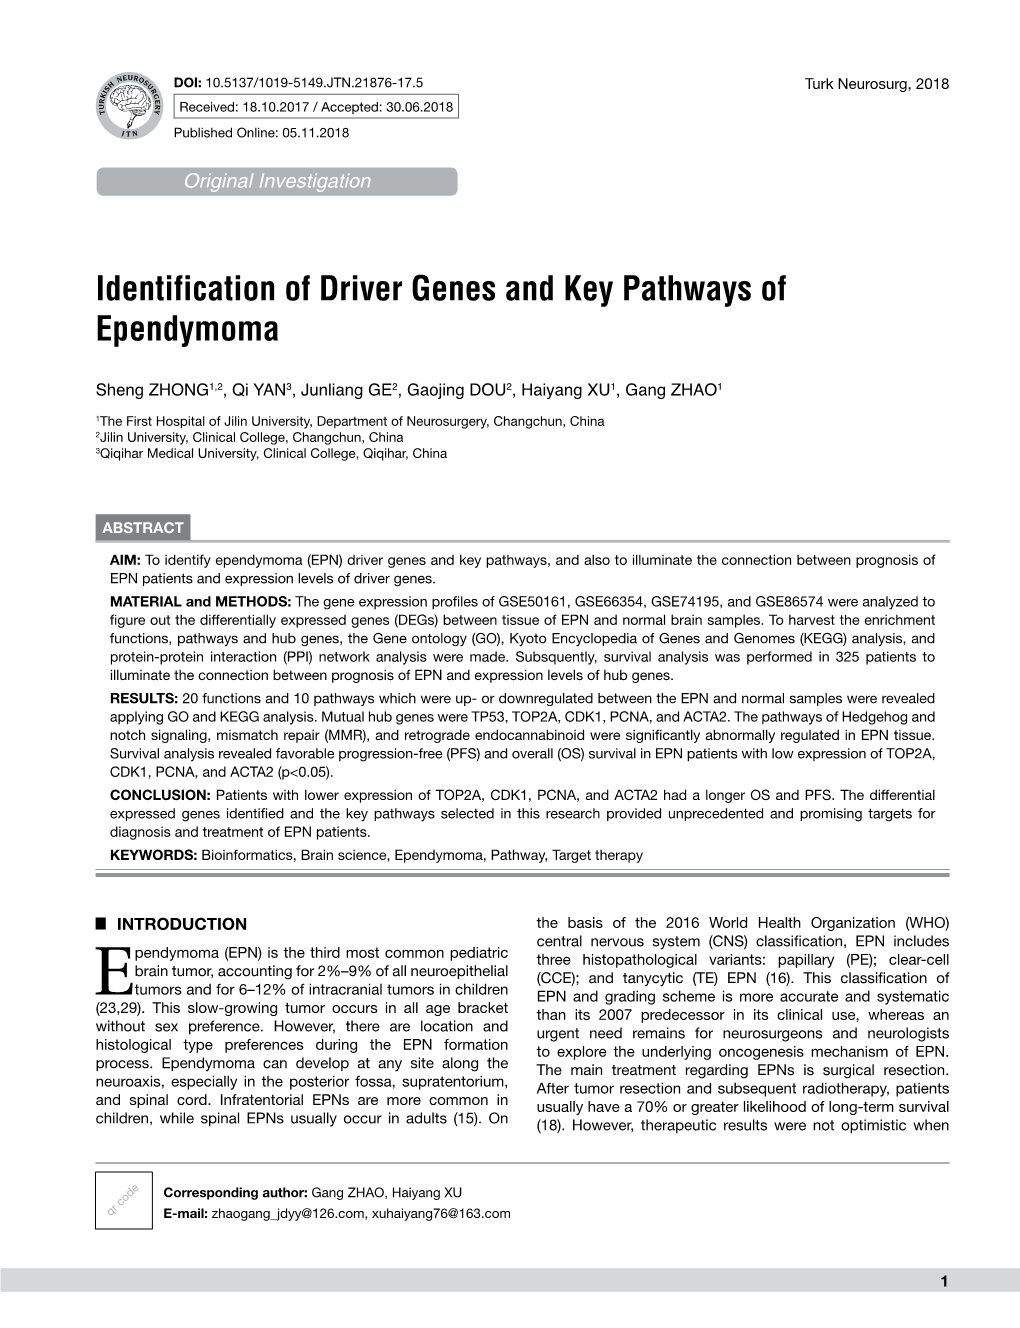 Identification of Driver Genes and Key Pathways of Ependymoma